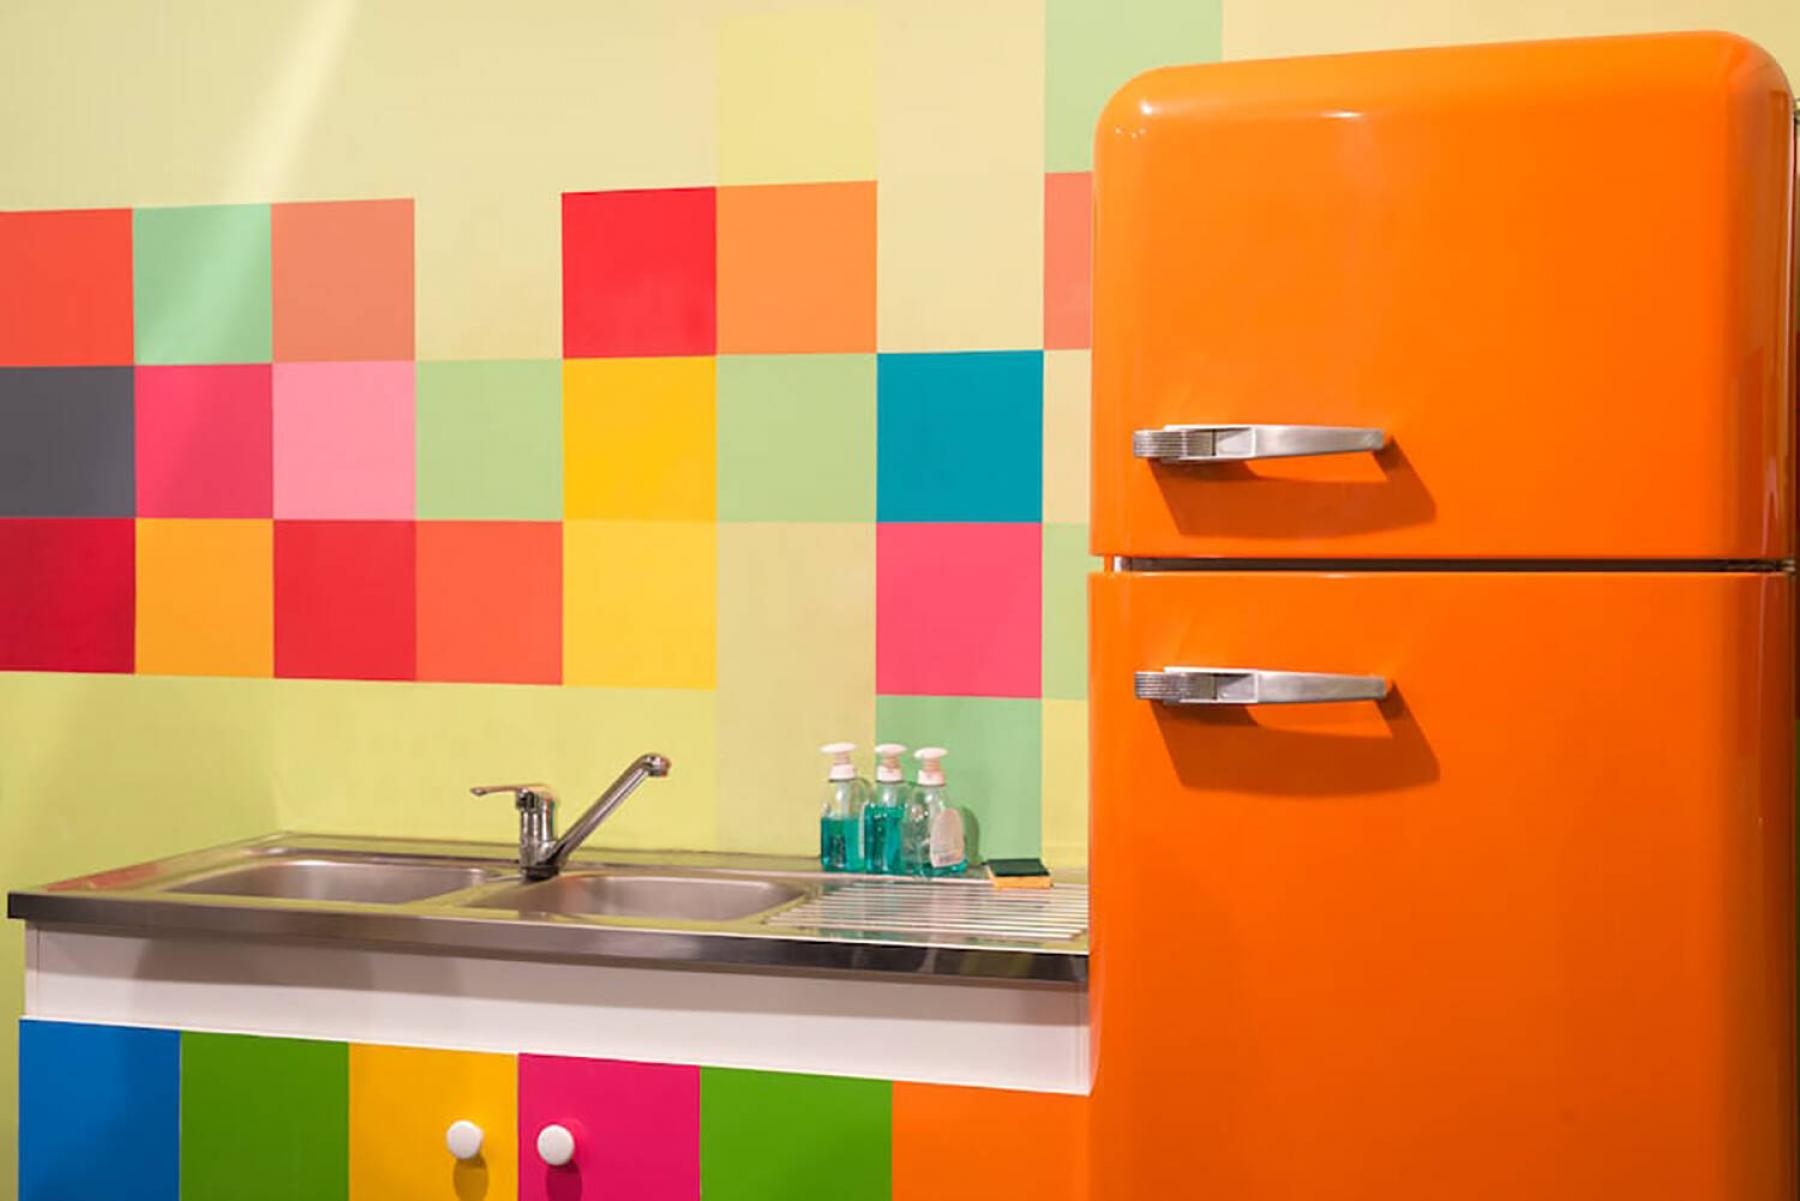 <p>The Washington Post</p><p>After decades of relying on stainless steel, people are bringing whimsy and personal taste into their kitchens with colourful appliances.</p>